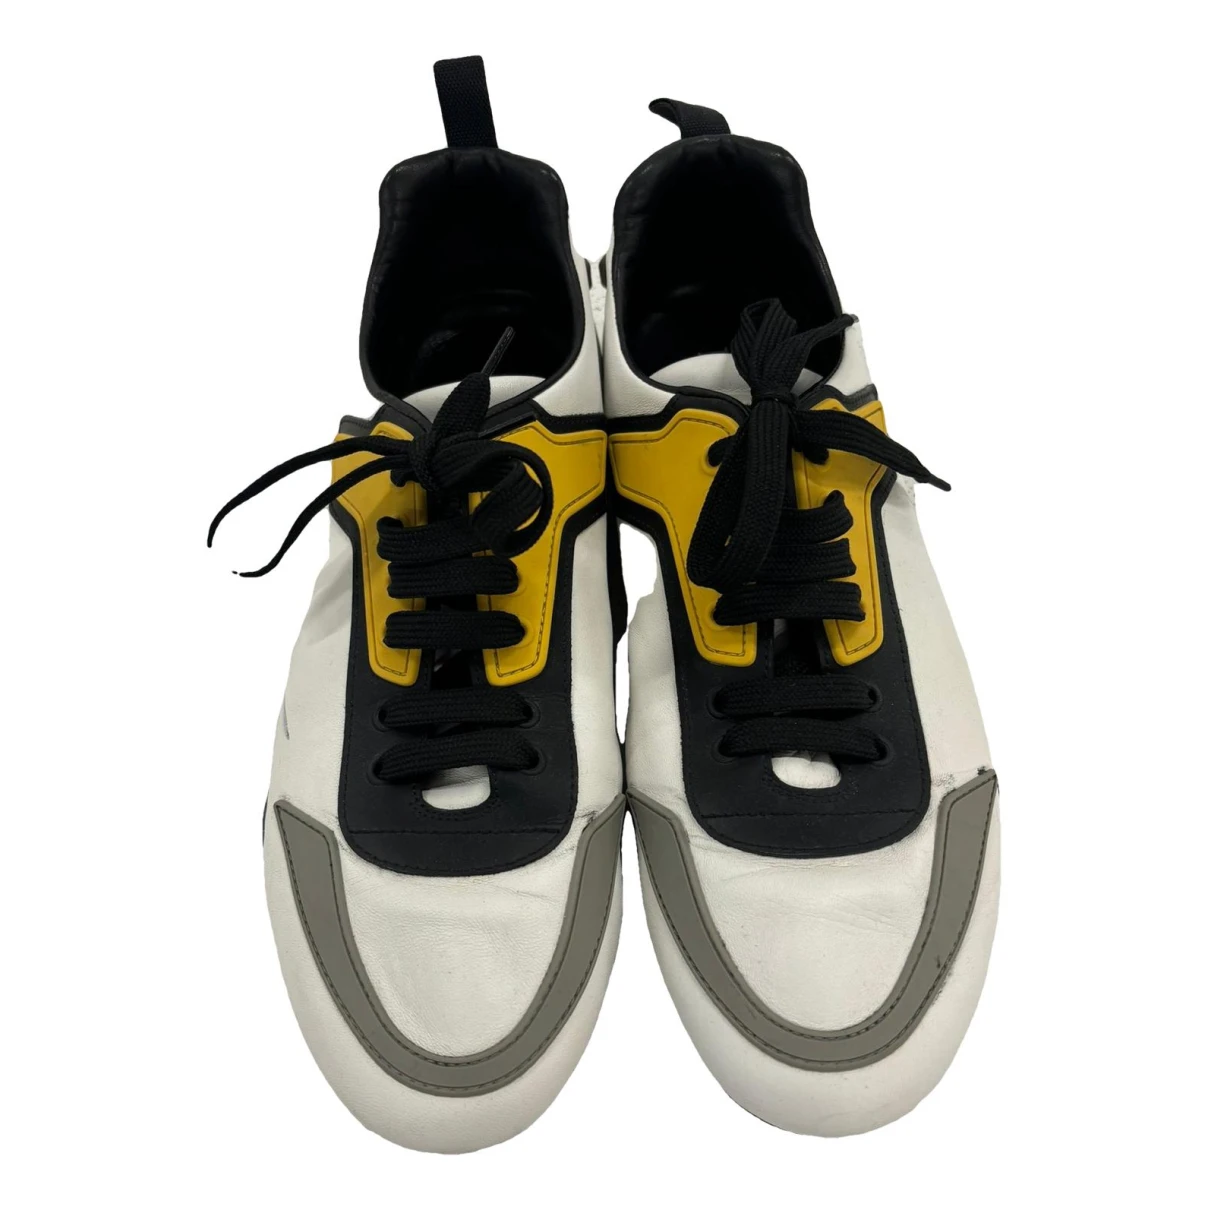 Pre-owned Prada Leather Low Trainers In White